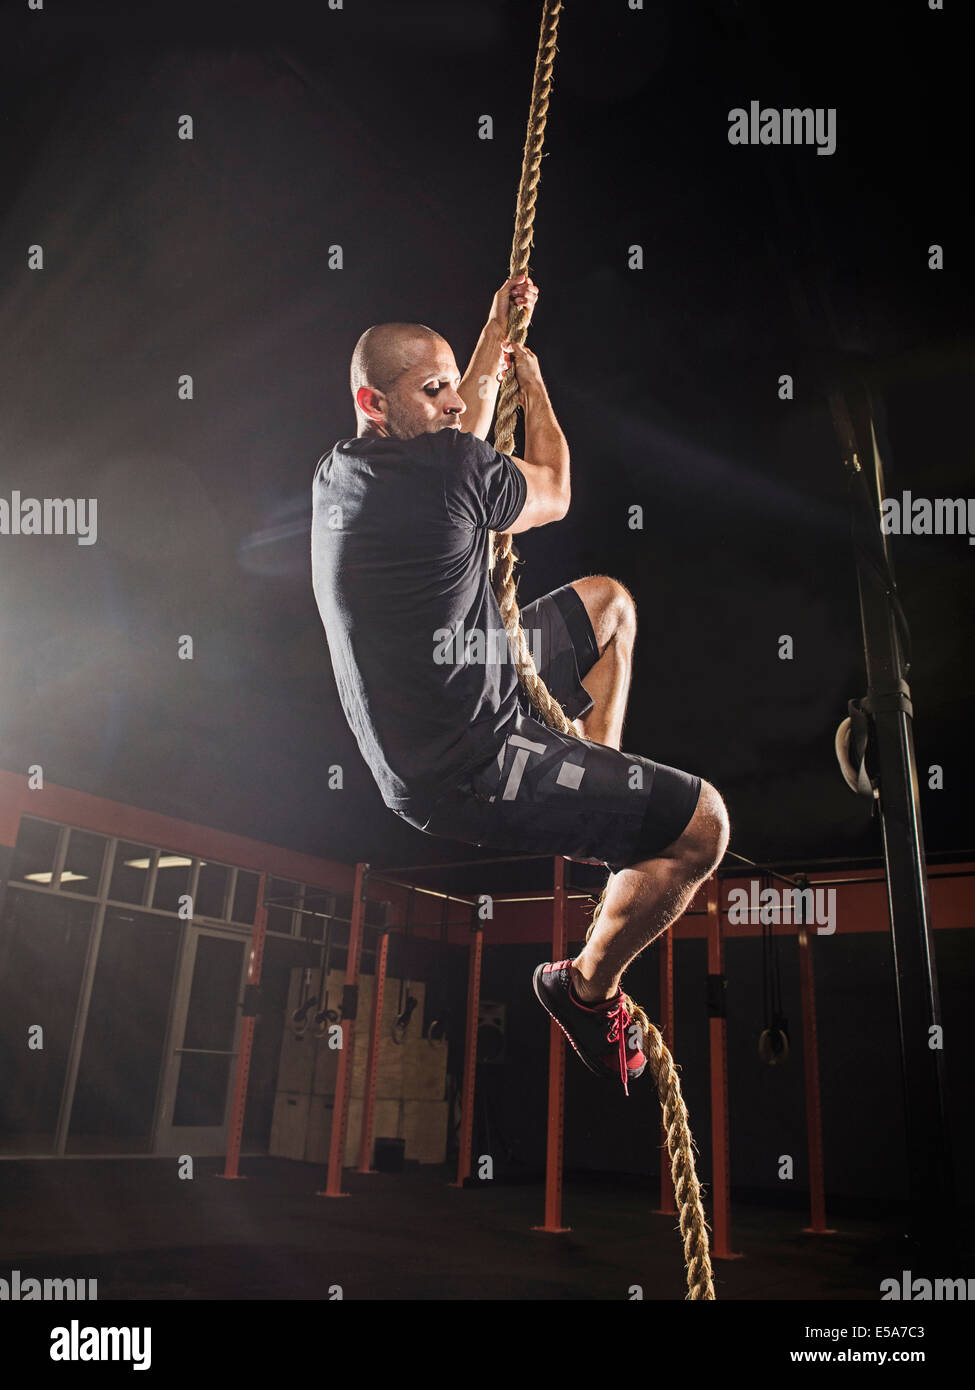 Man climbing rope in gym Banque D'Images